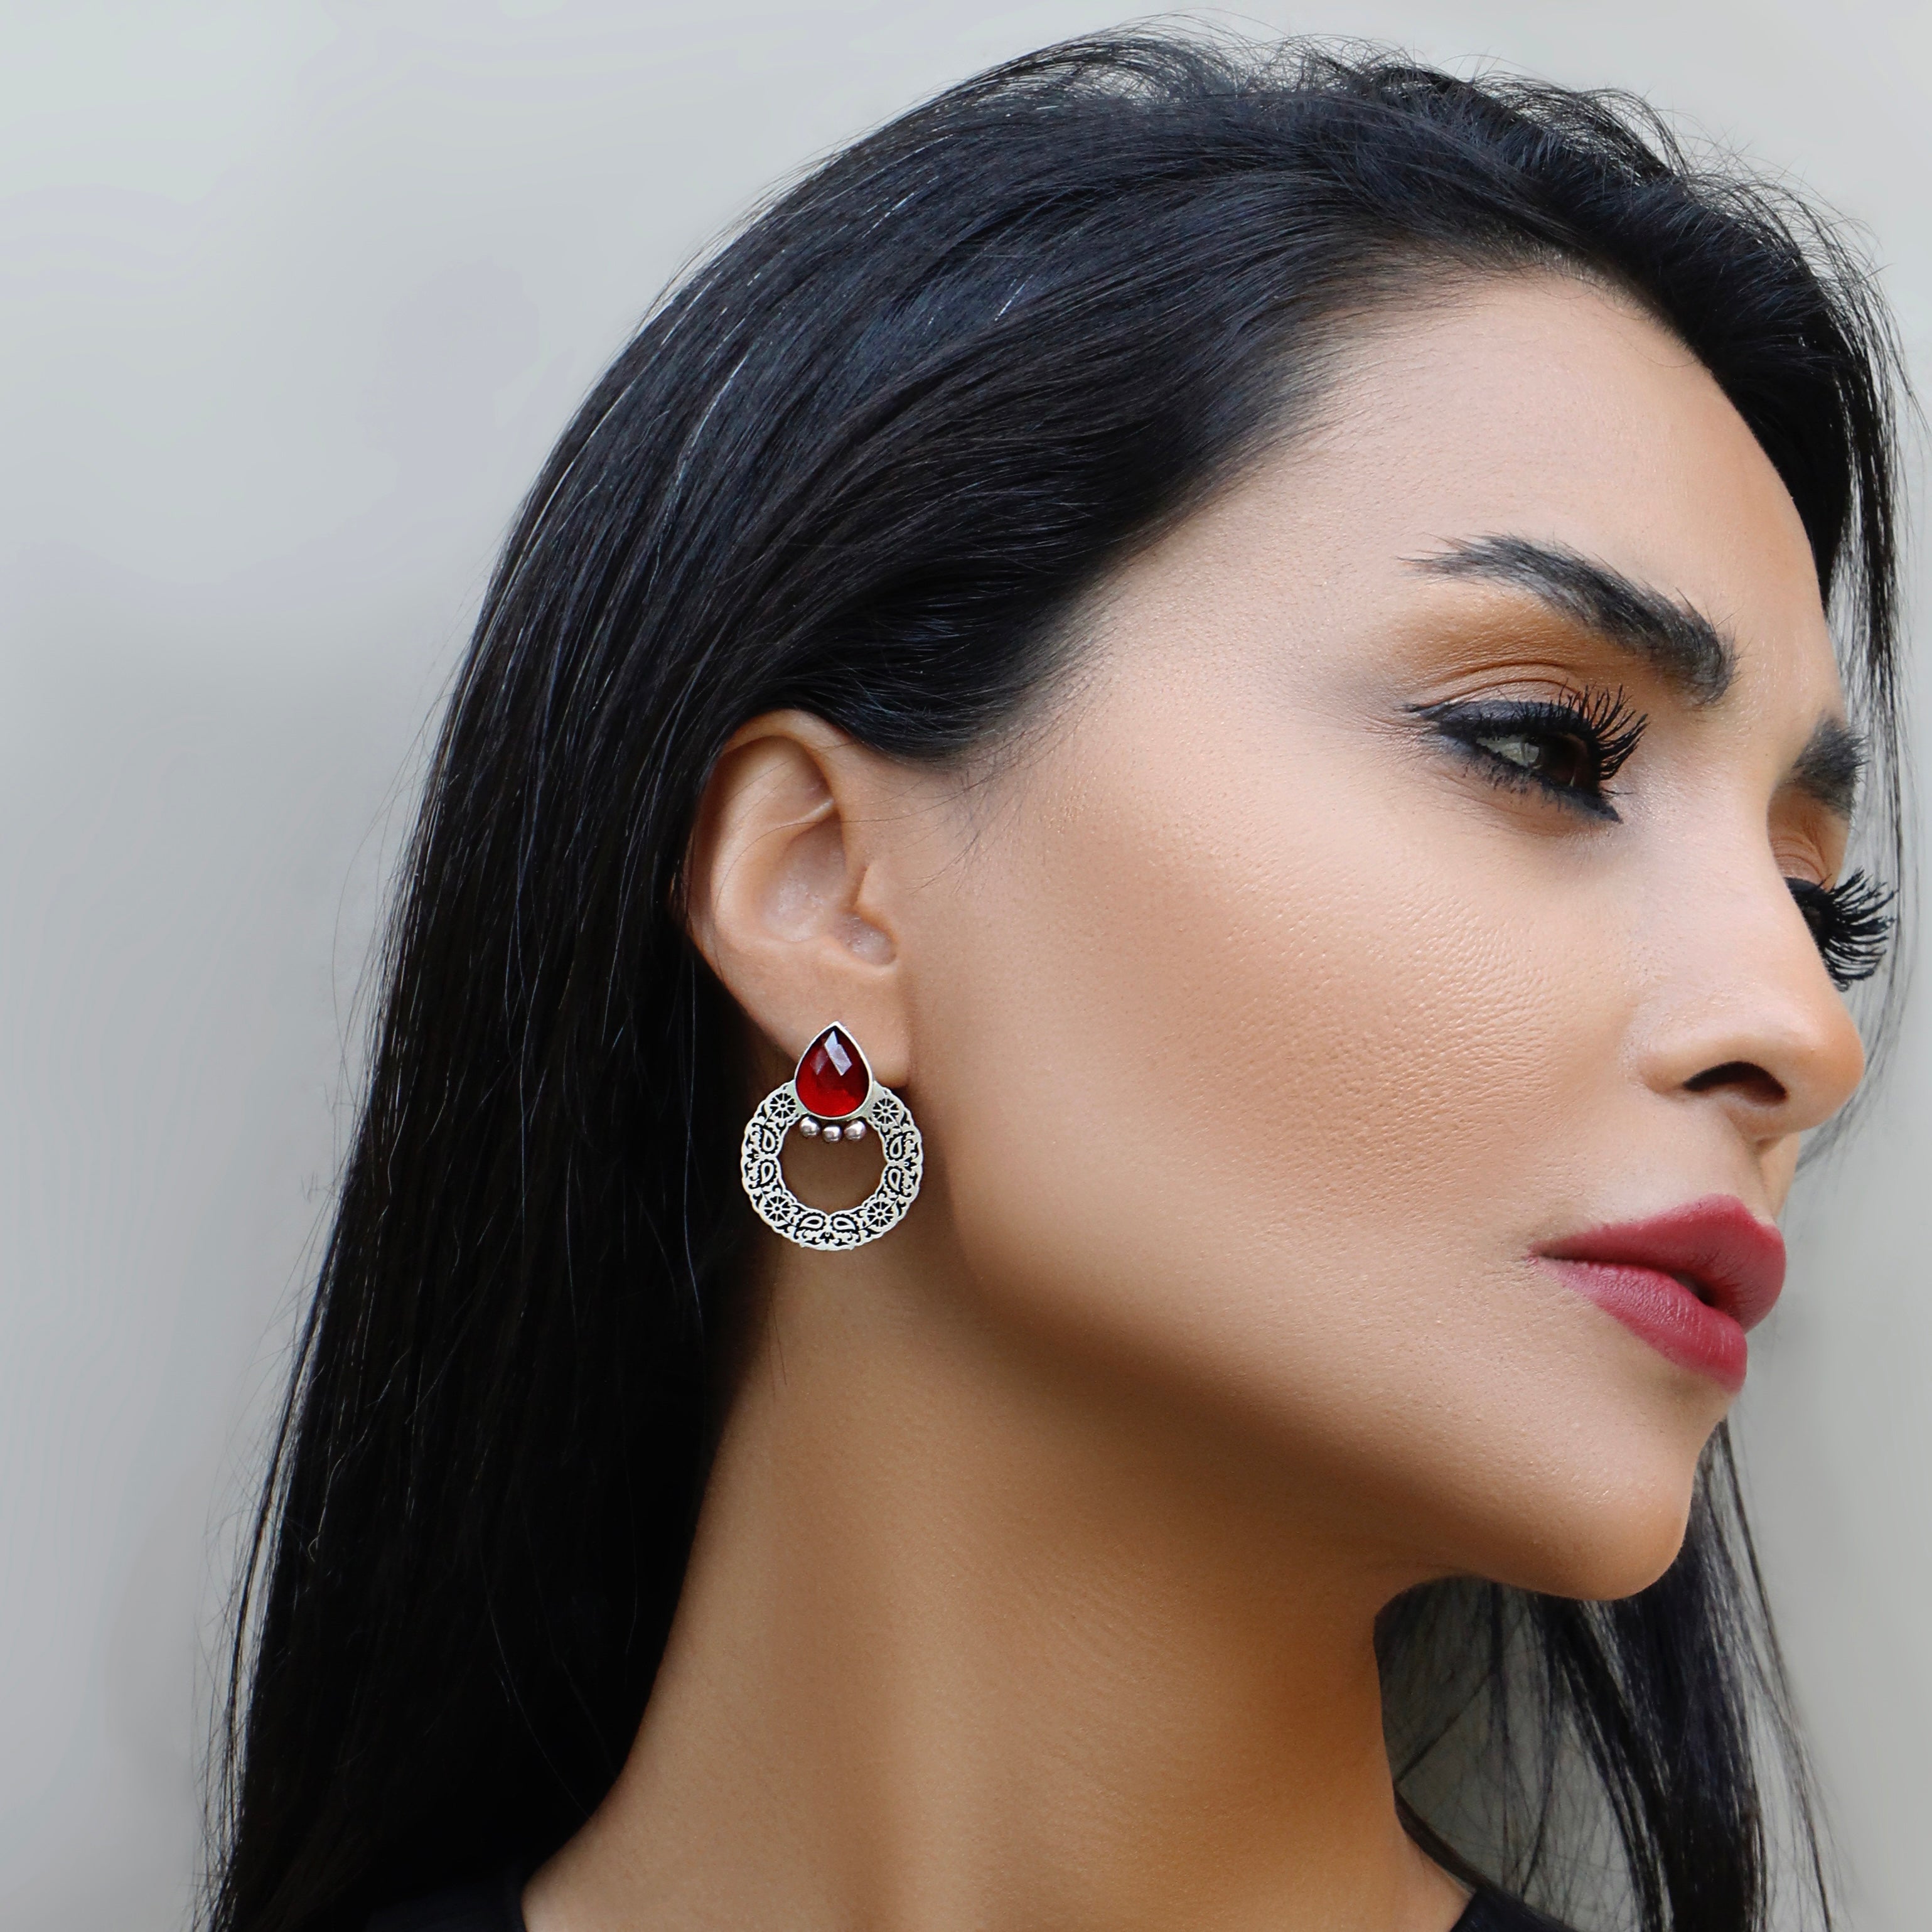 Persian Earrings-Handmade Persian Earrings with Engraving and Red Crystal:Persian Jewelry-AFRA ART GALLERY